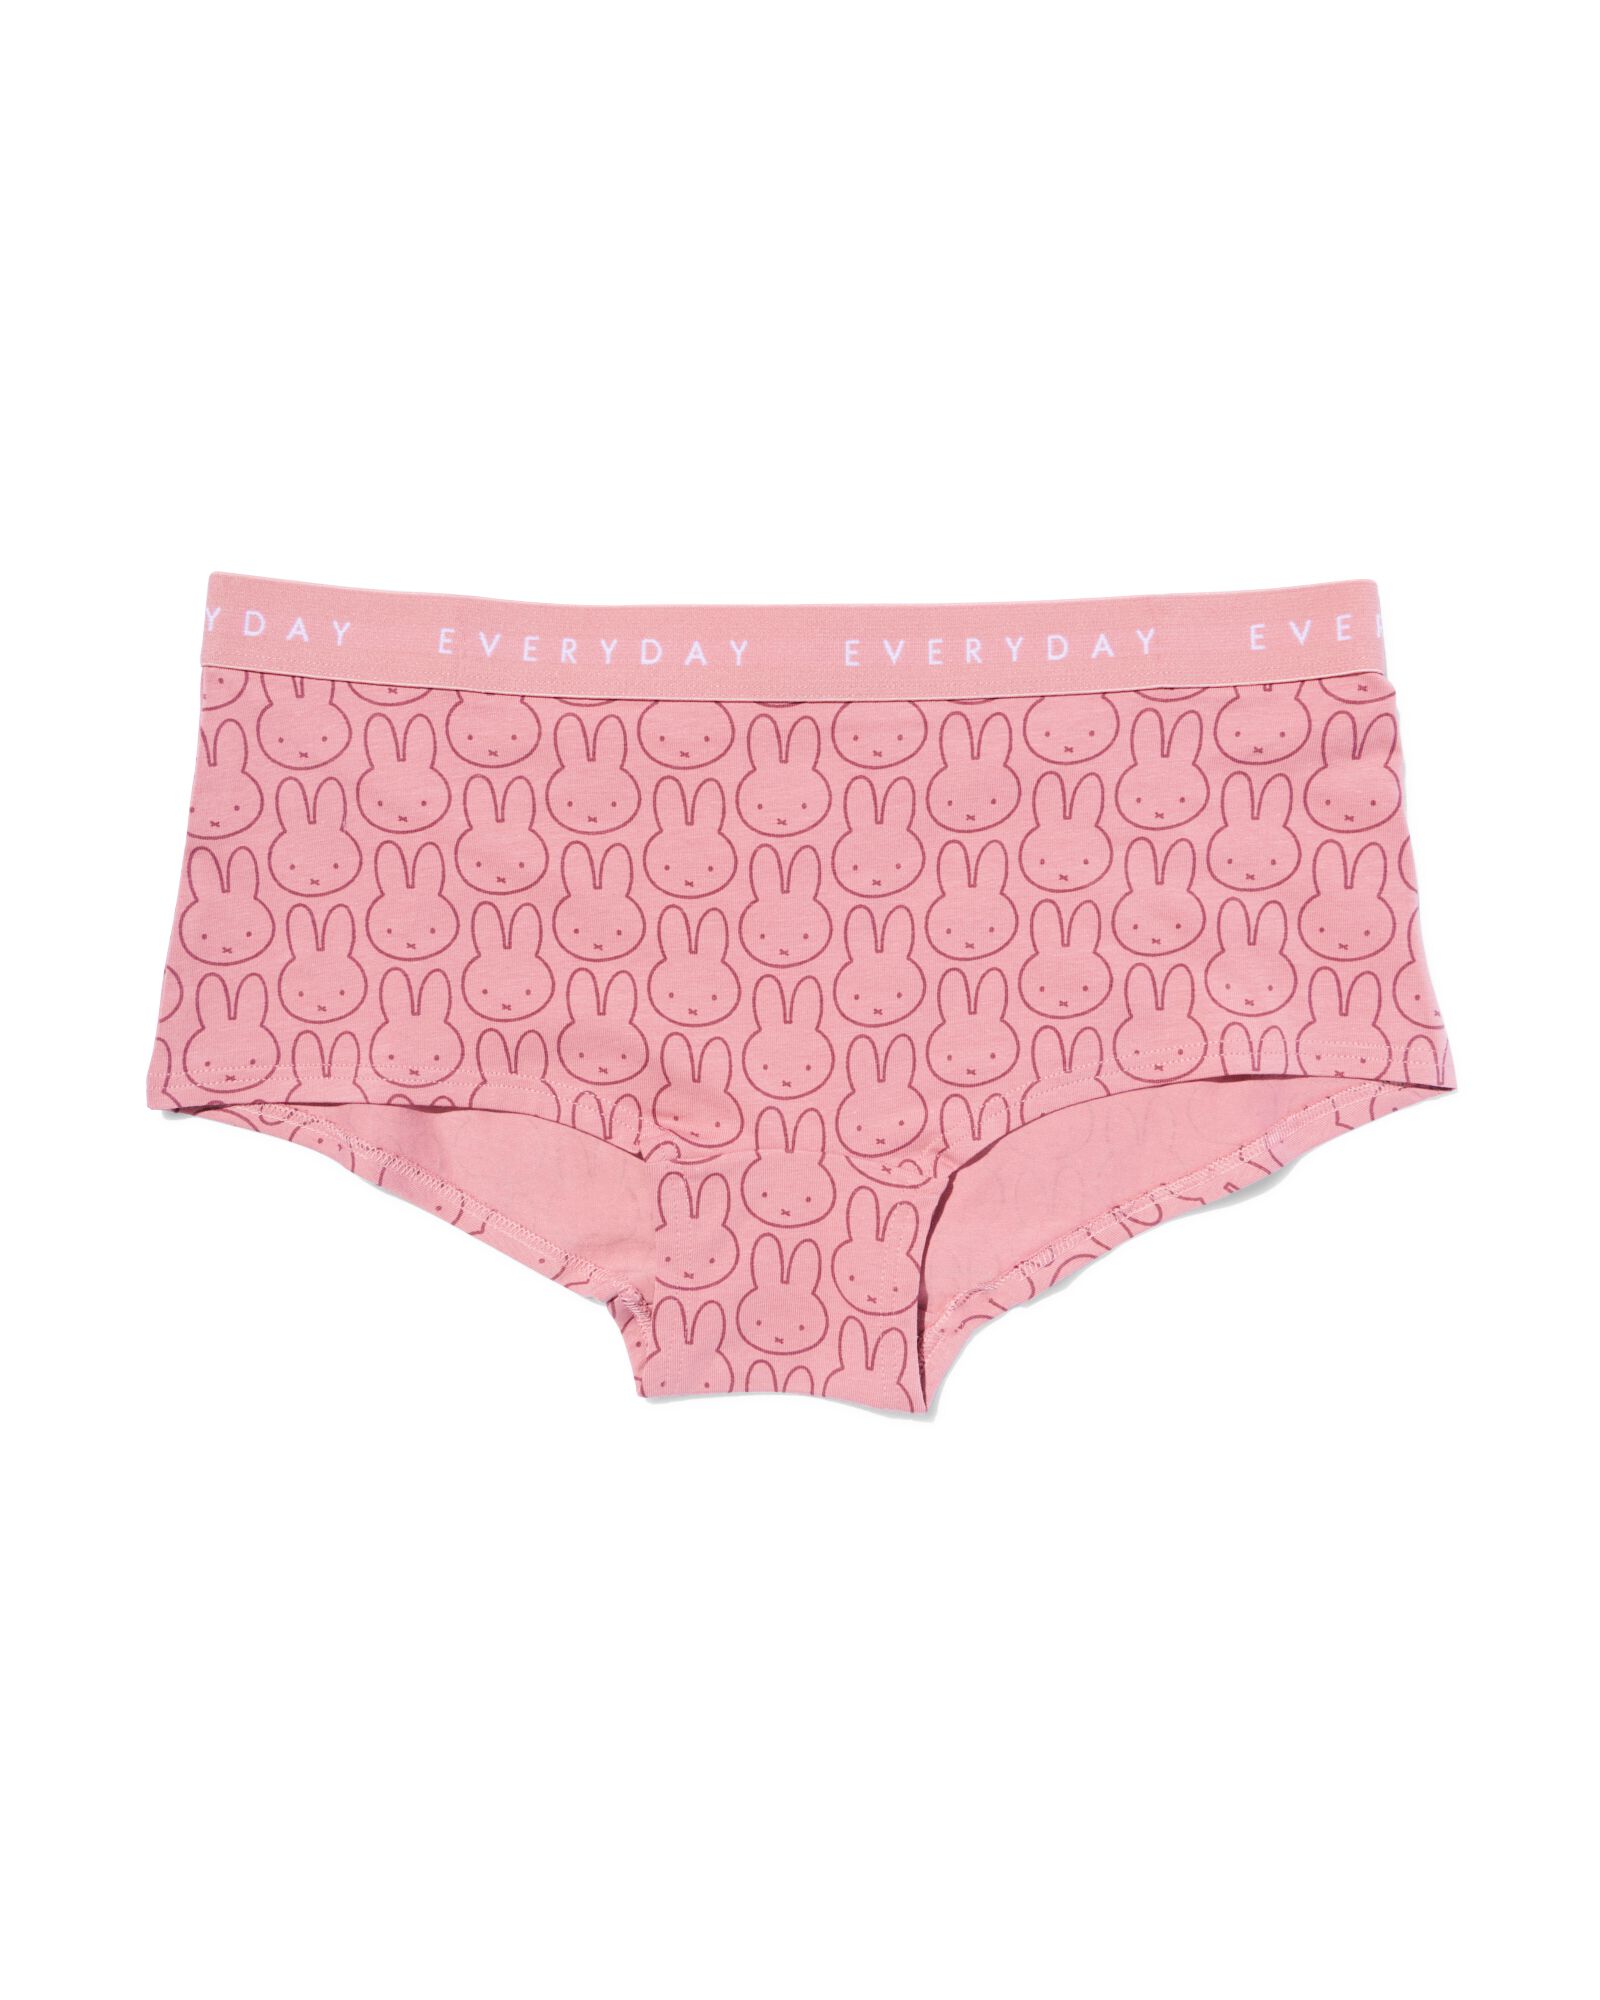 shortie femme Miffy coton everyday vieux rose vieux rose - 19630205OLDPINK - HEMA